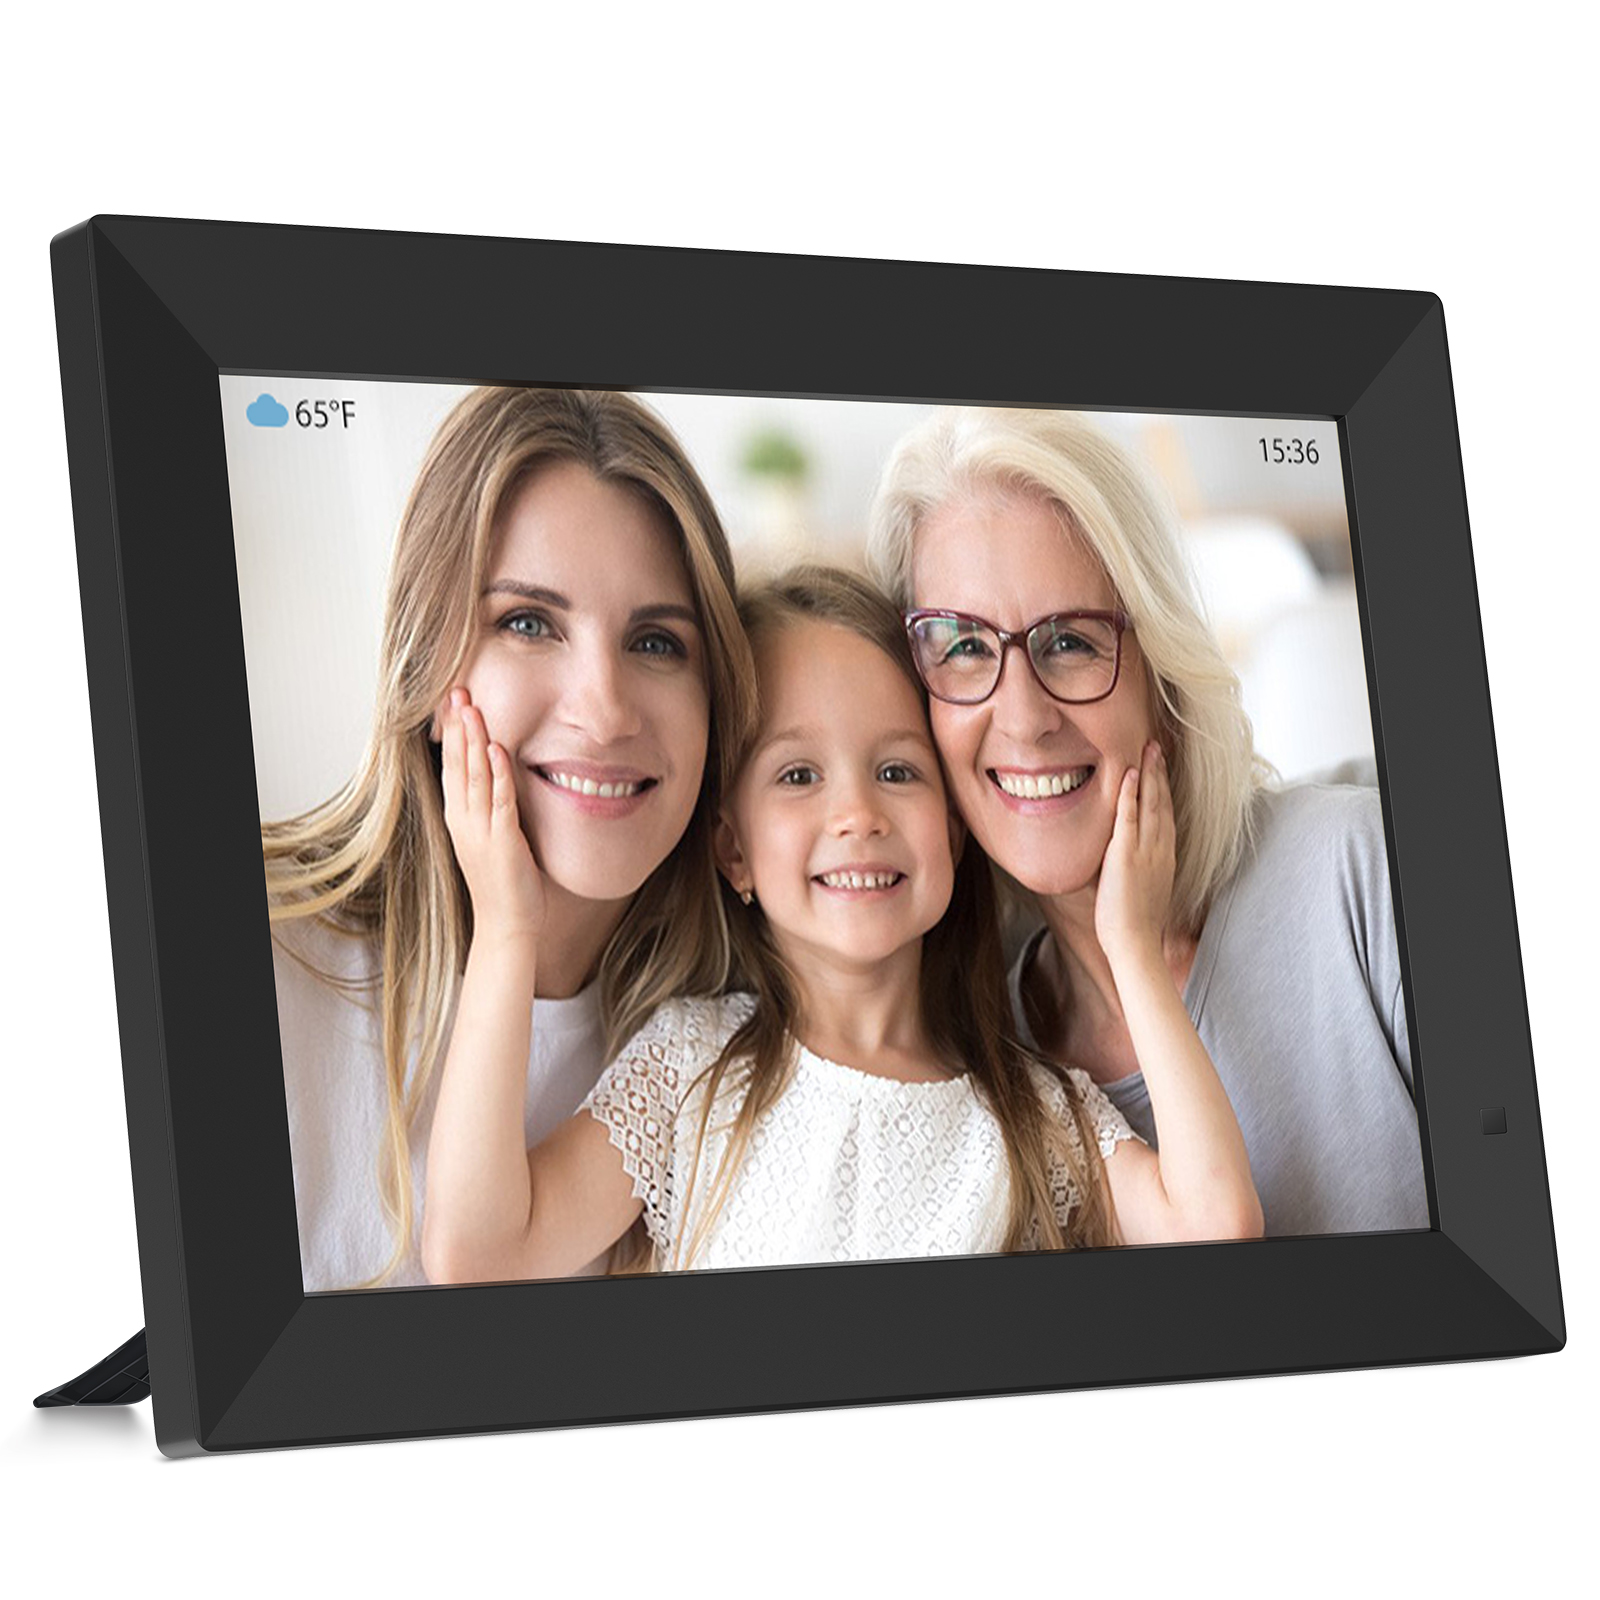 MAGCH Digital Picture Frame WiFi 10 inch IPS Touch Screen HD Display, Digital Photo Frame with 16GB Storage, Auto-Rotate, Share Photos via App, Email, Cloud